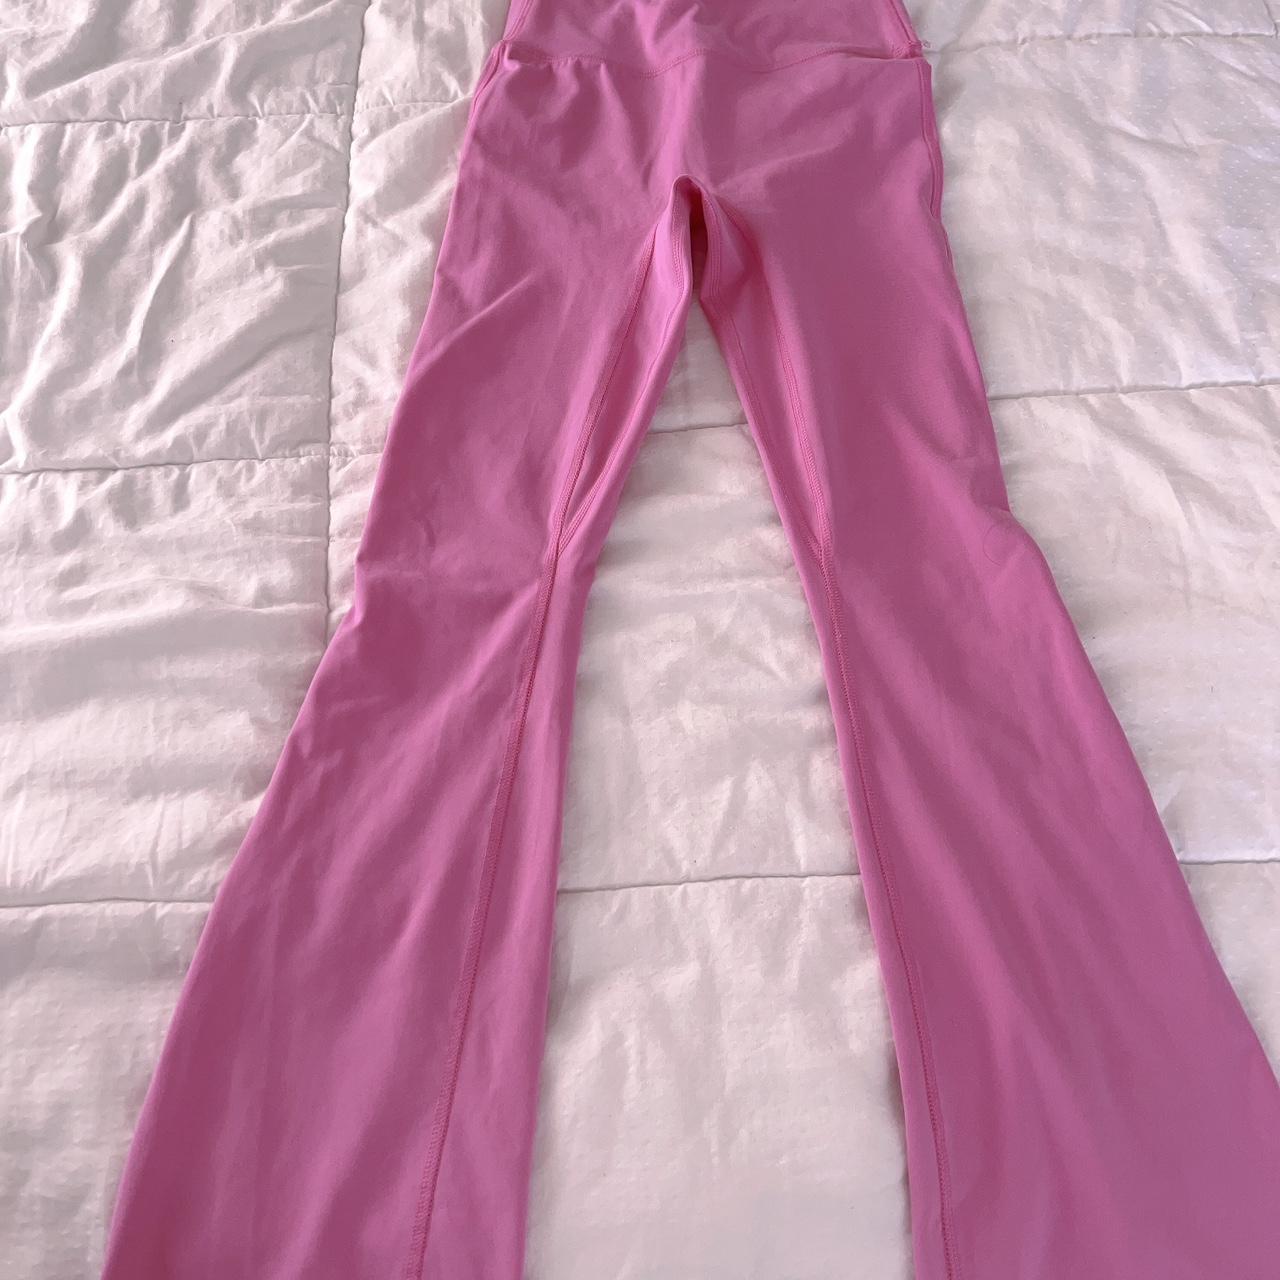 Target Women's Pink Trousers